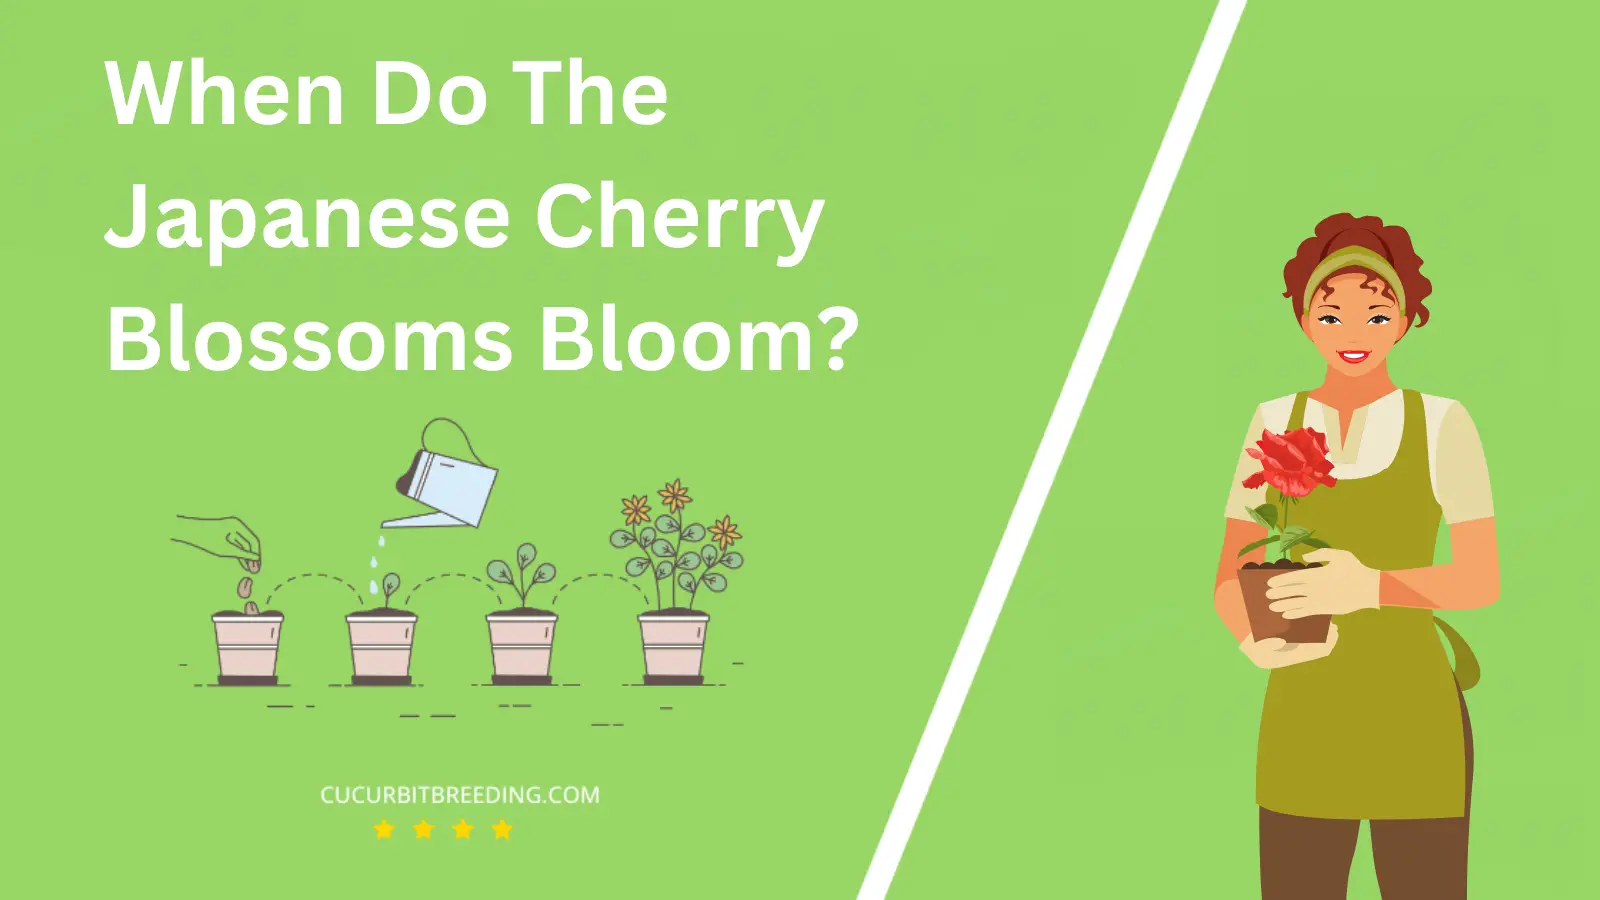 When Do The Japanese Cherry Blossoms Bloom?